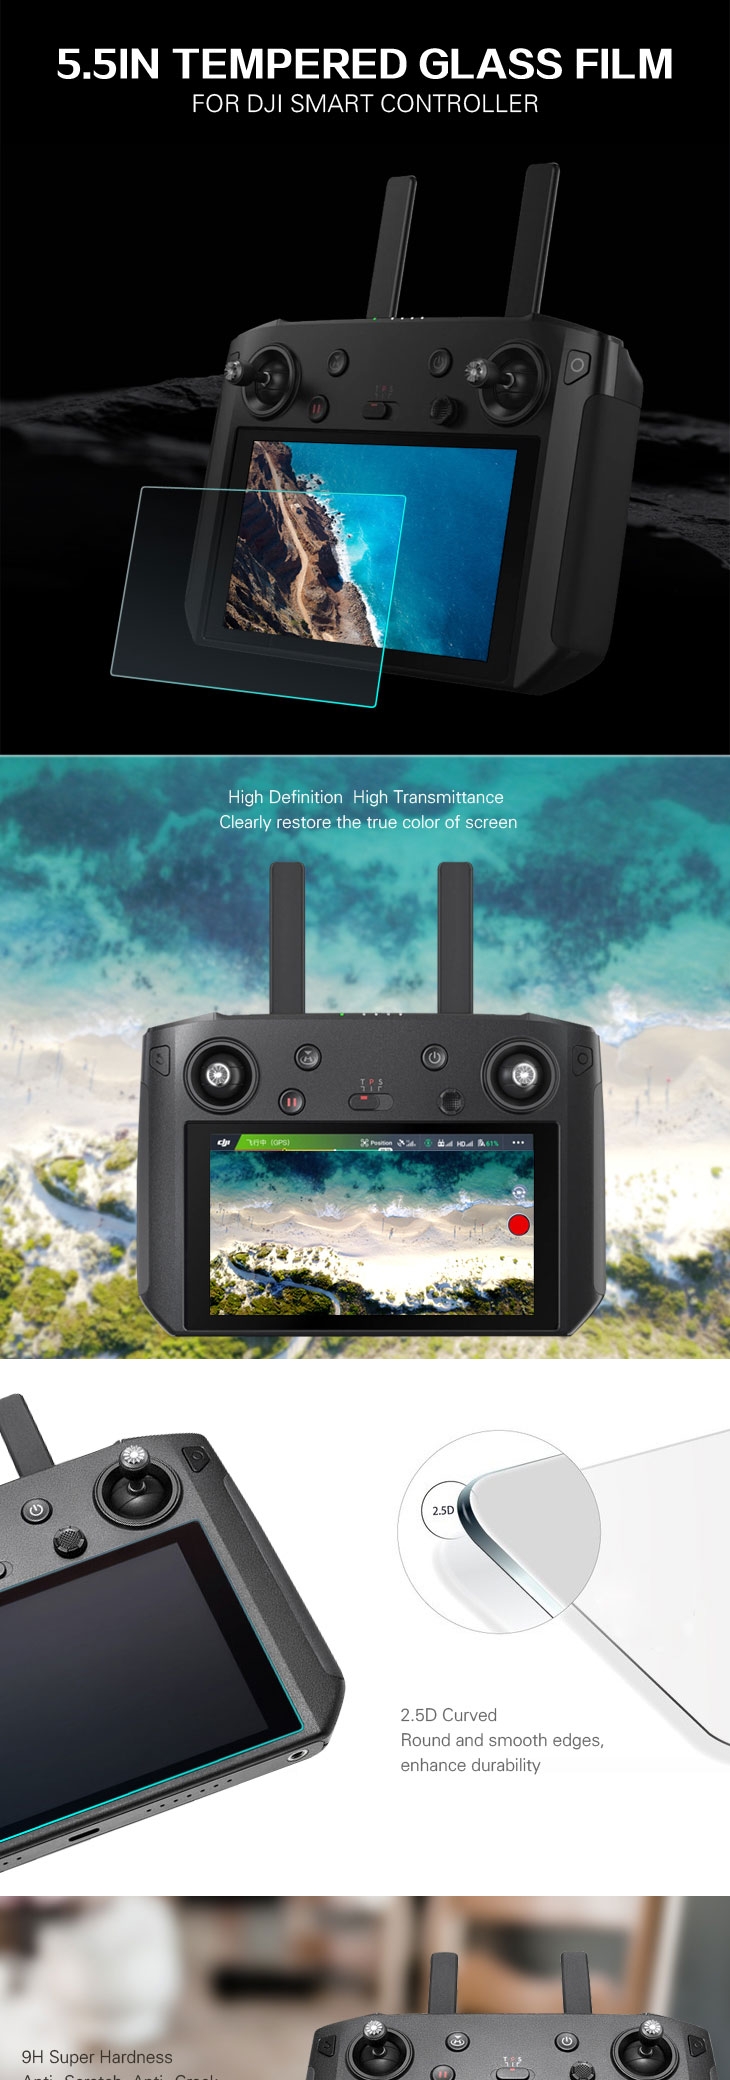 Sunnylife 5.5in Screen Tempered Glass Protective Film for DJI MAVIC 2 Smart Remote Controller